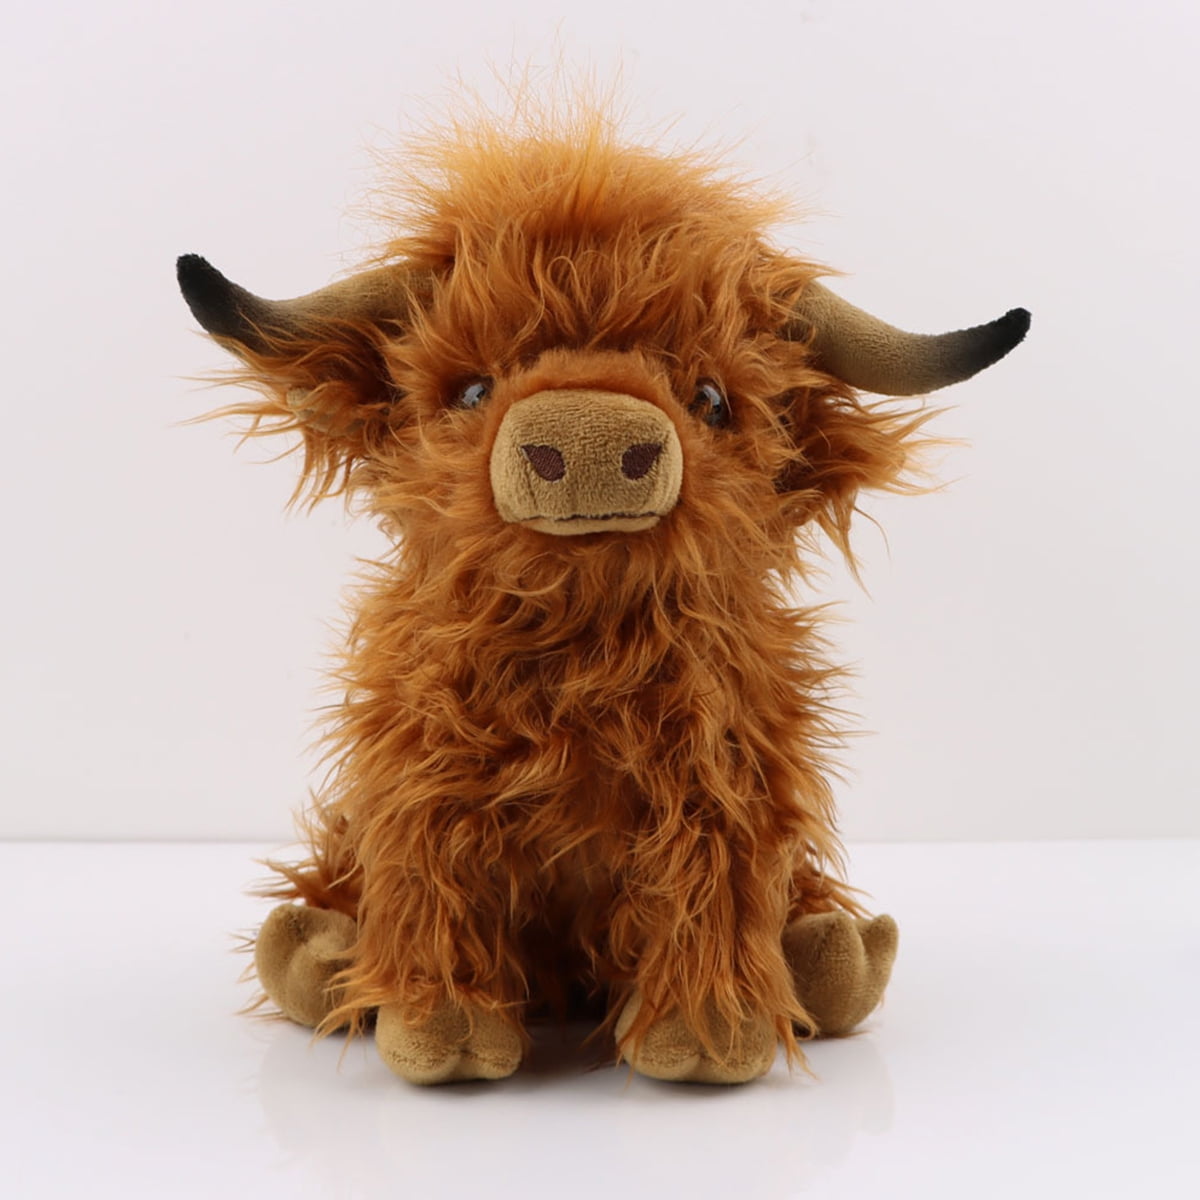 LIVING NATURE LARGE HIGHLAND COW WITH SOUND AN341 SOFT CUDDLY STUFFED PLUSH 